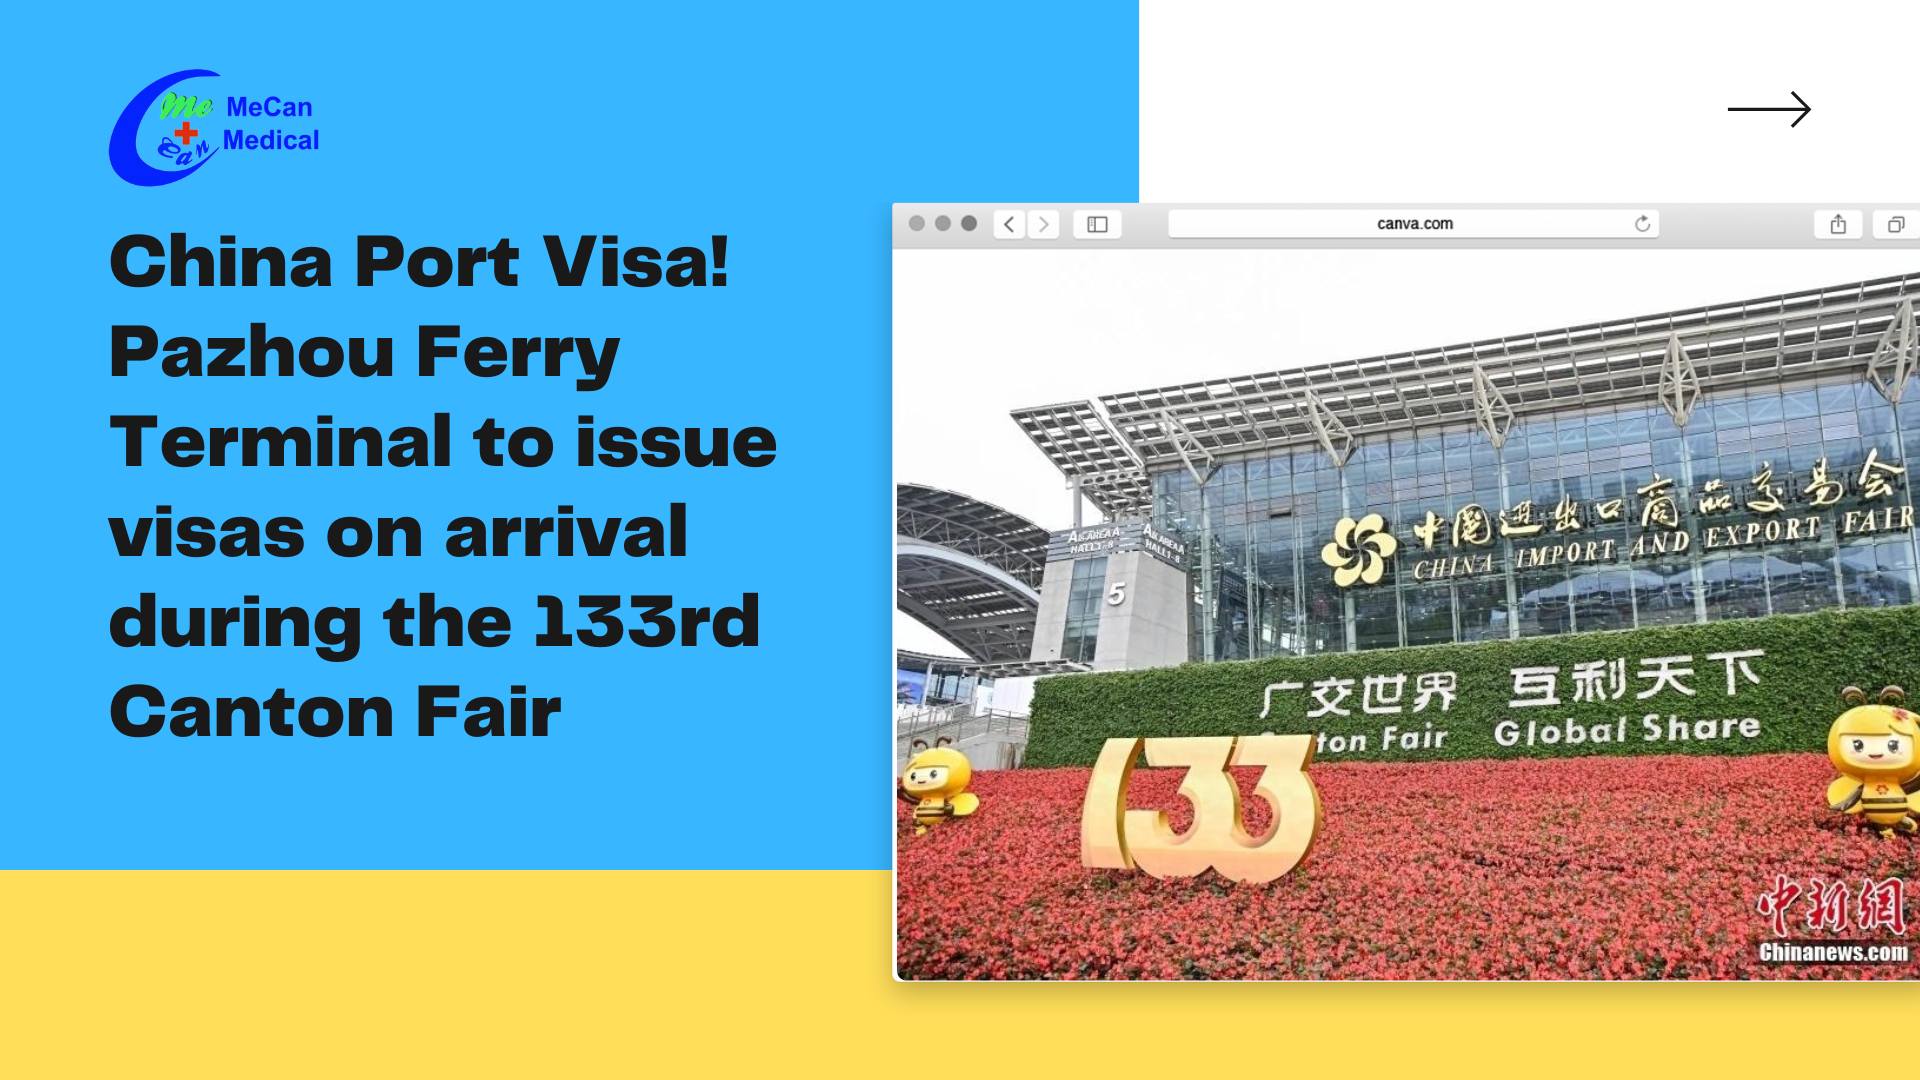 China Port Visa! Pazhou Ferry Terminal to issue visas on arrival during the 133rd Canton Fair